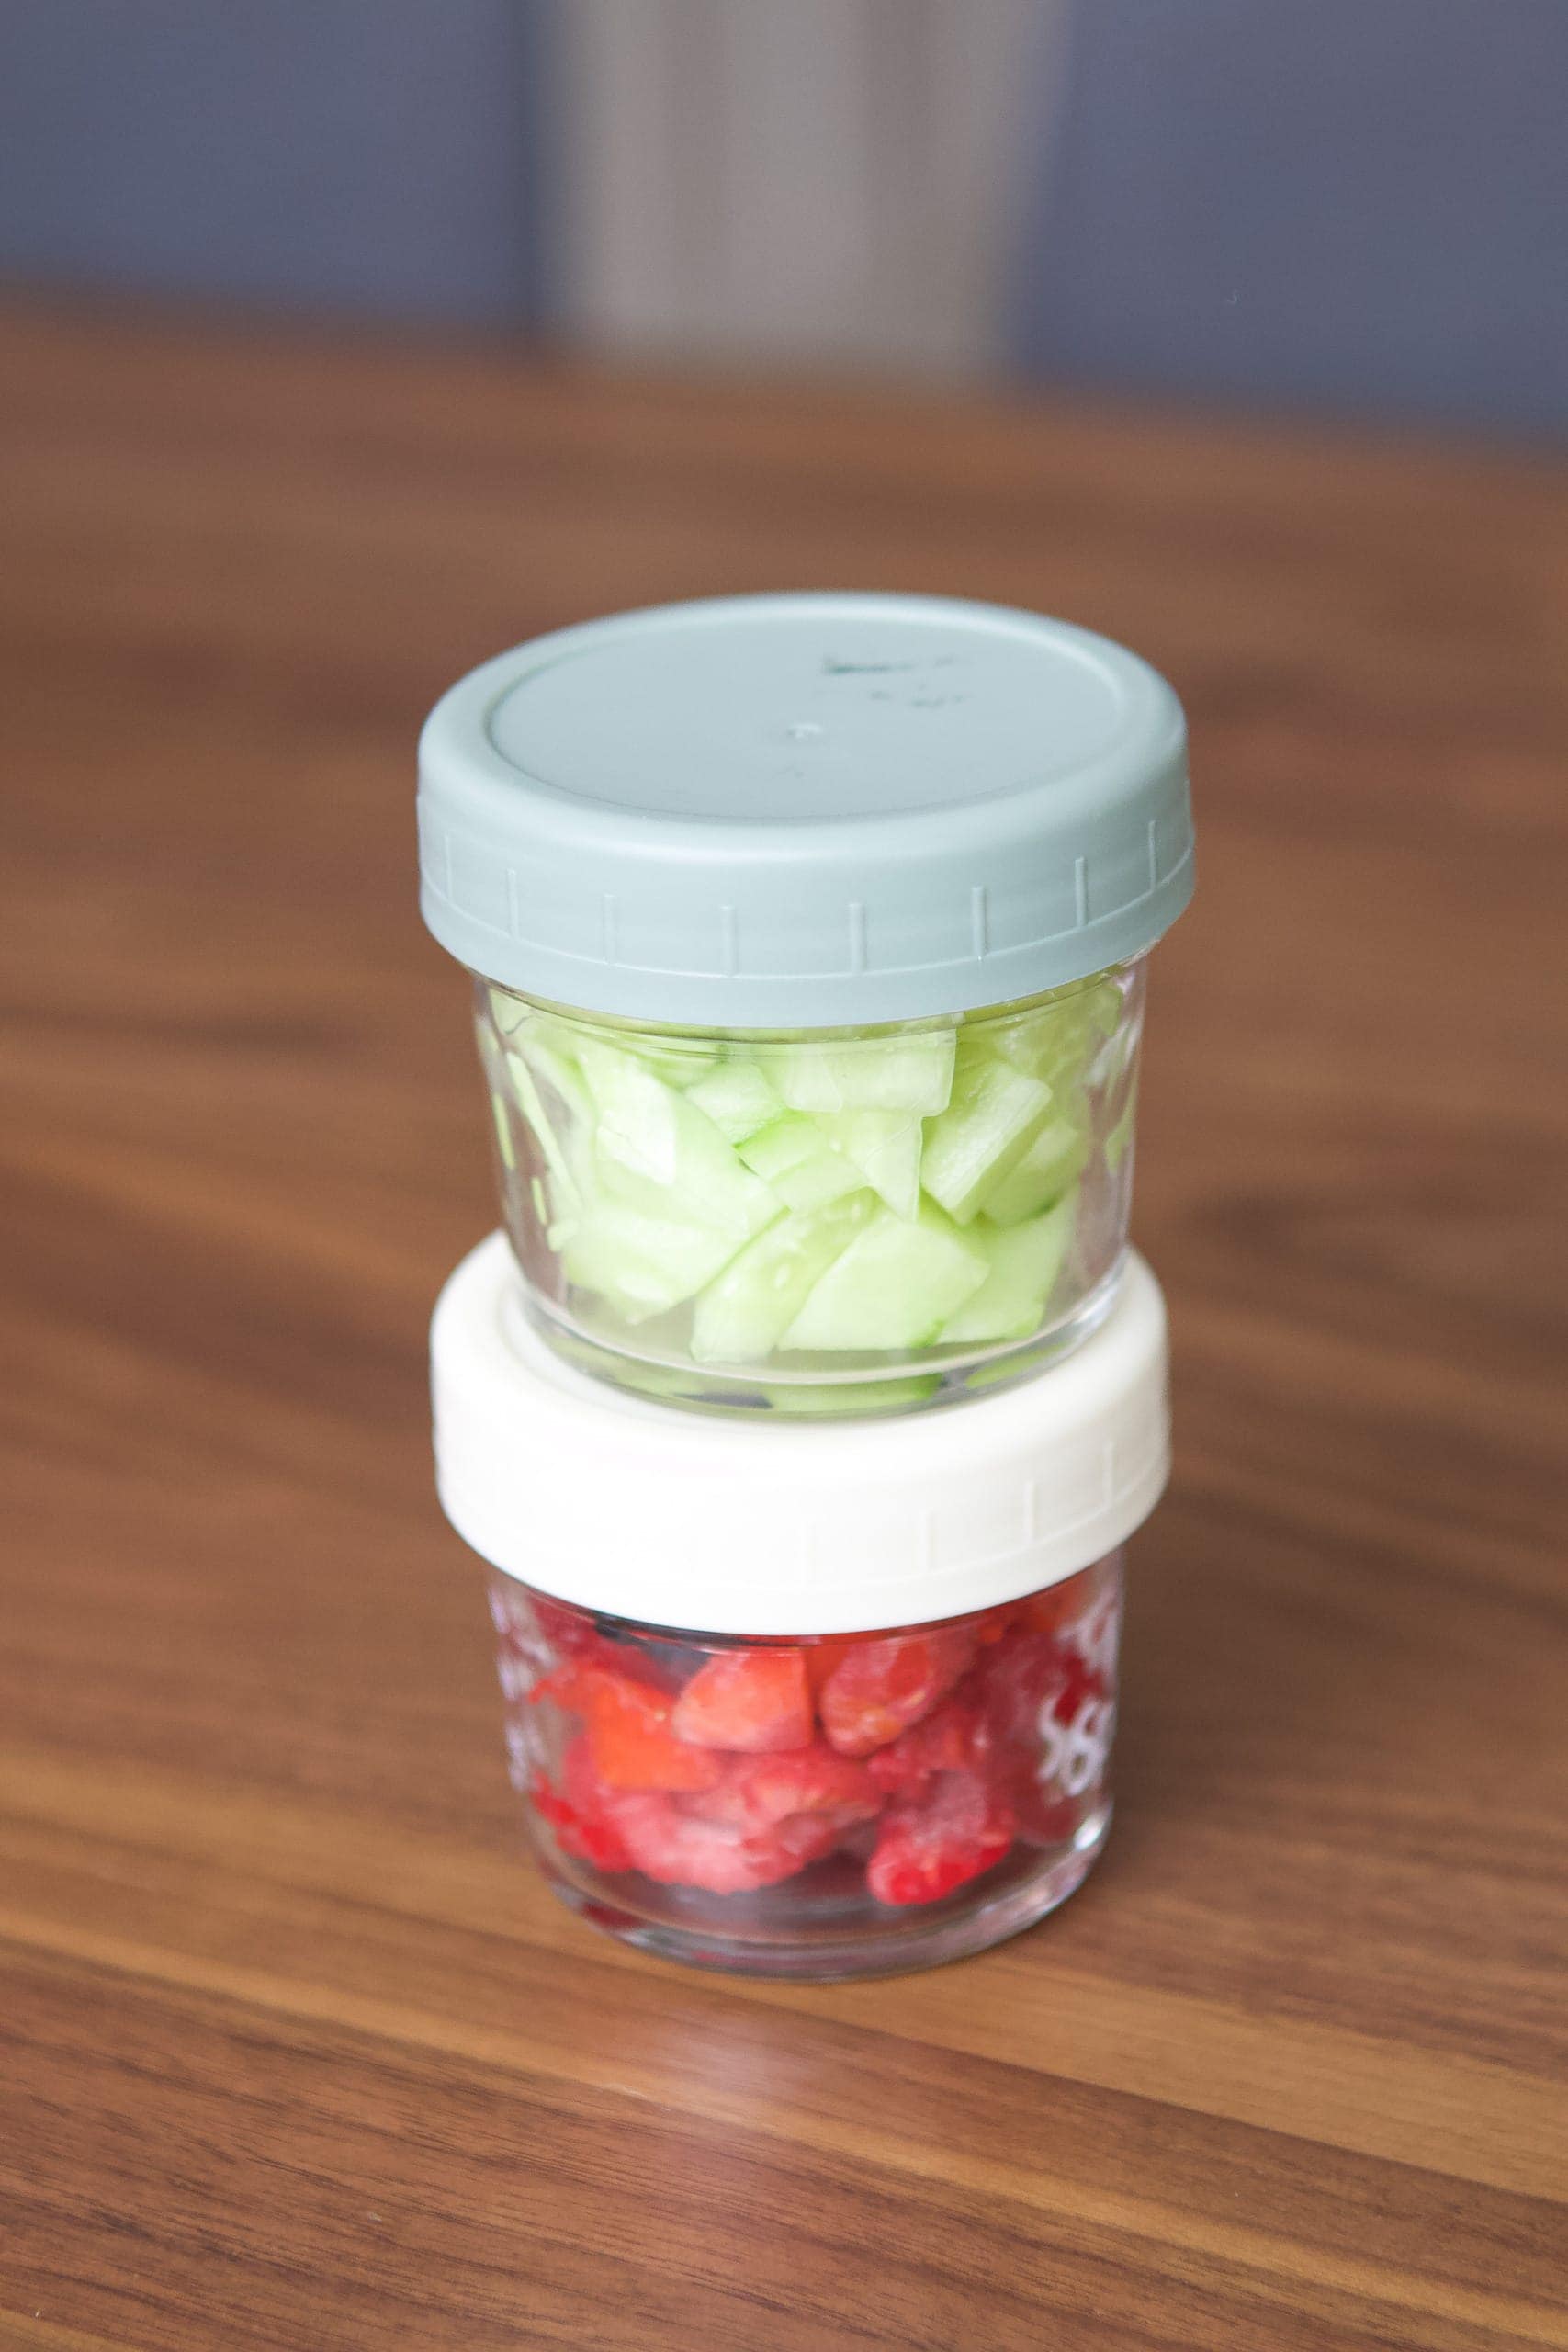 The jars we use to meal prep for baby led weaning